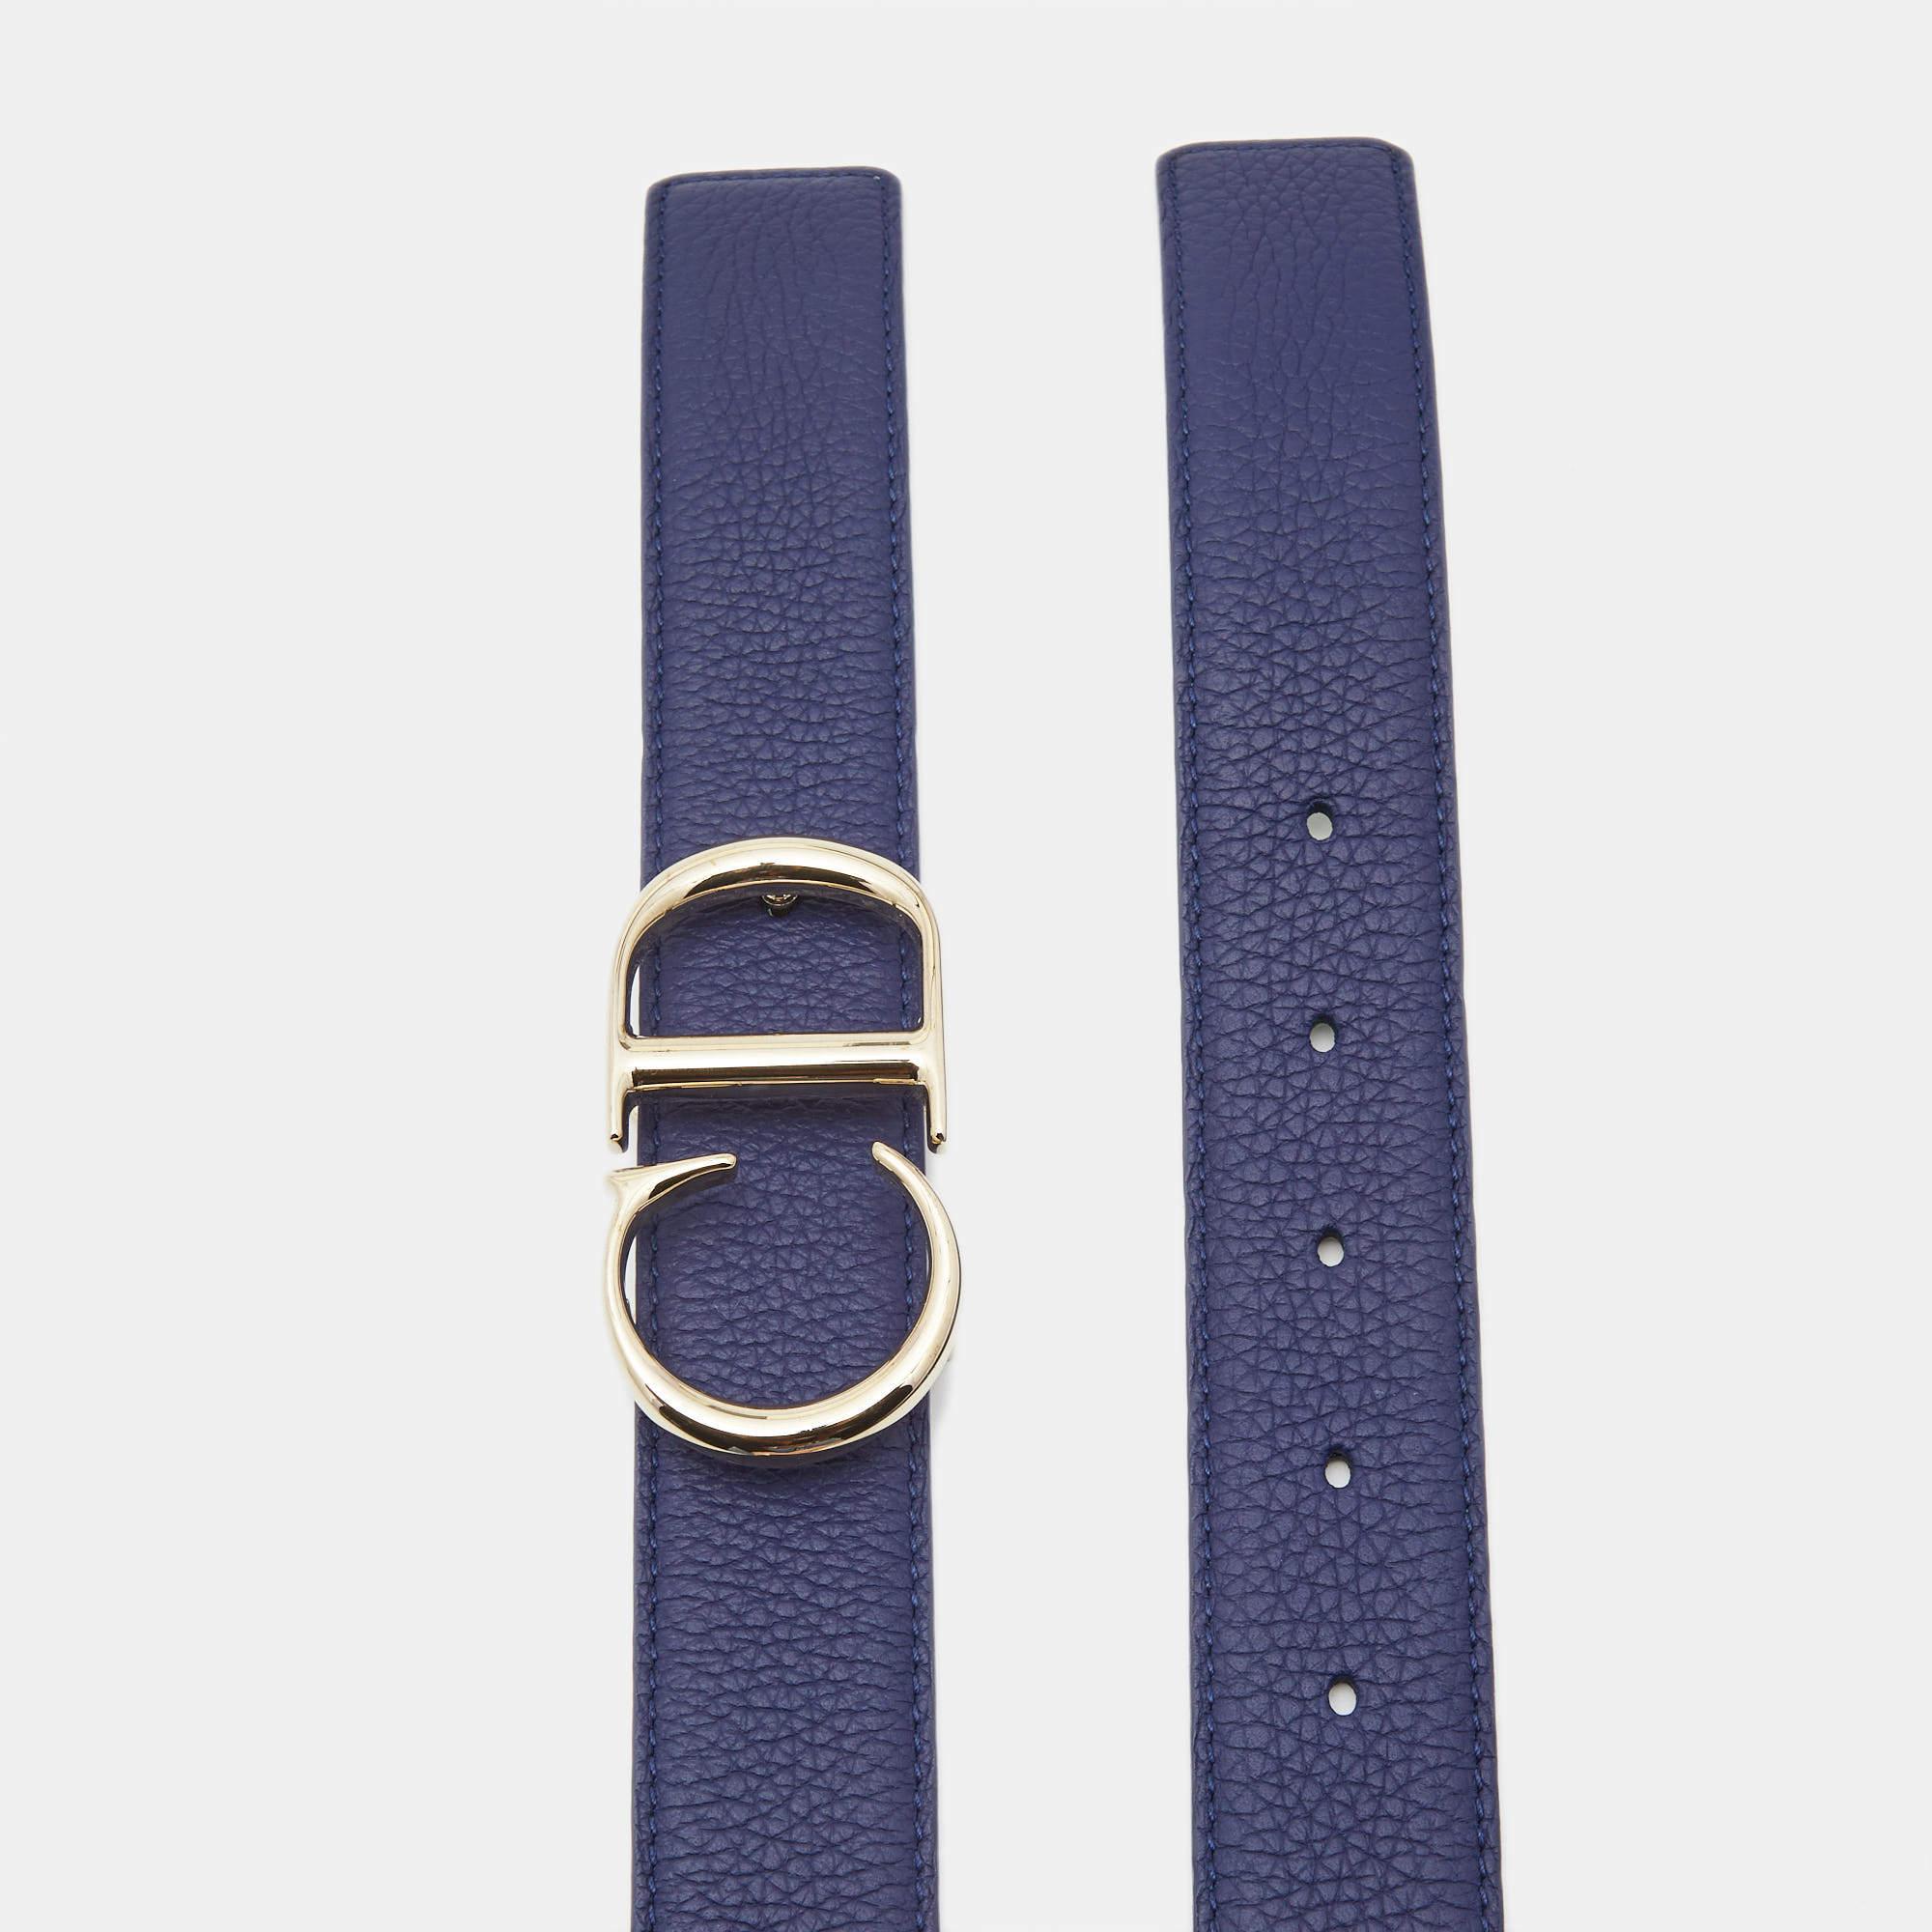 Arrive in style with this Dior CD logo belt. Displaying silver-toned hardware and leather, this belt consists of a single loop for fastening. Complete your ensemble with this belt to achieve a classy appearance.

Includes: Original Dustbag